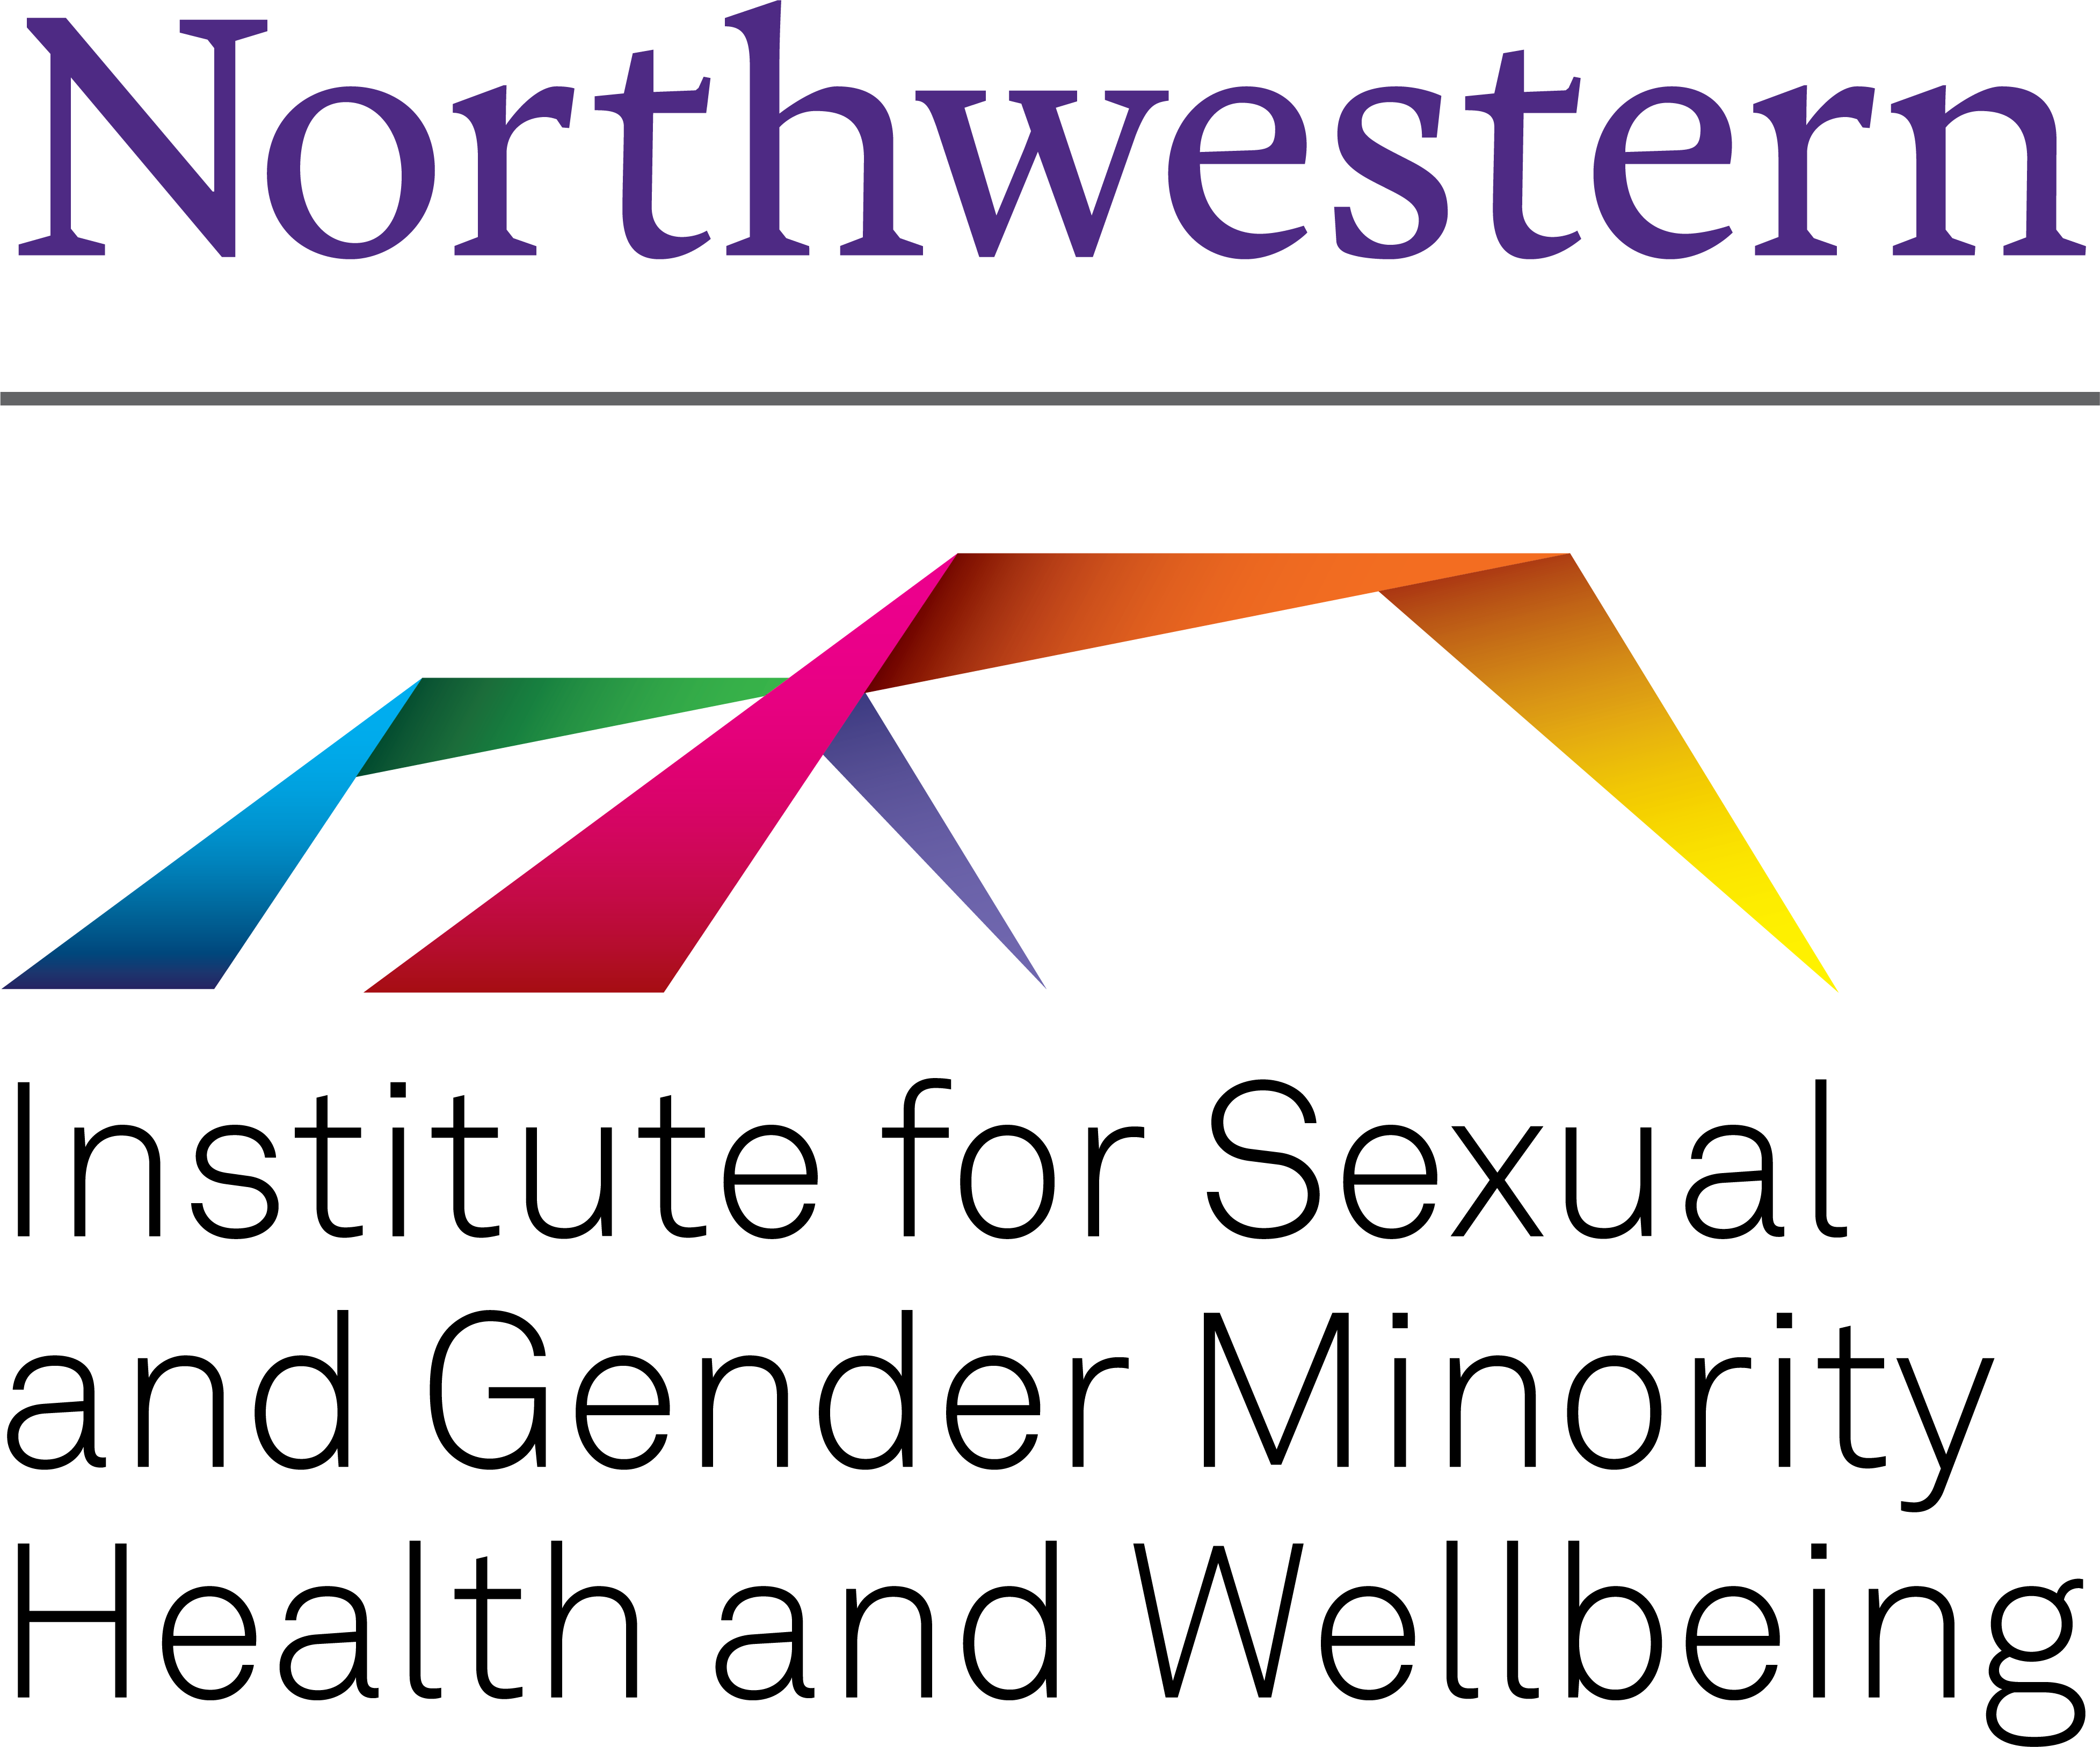 Institute for Sexual and Gender Minority Health and Wellbeing